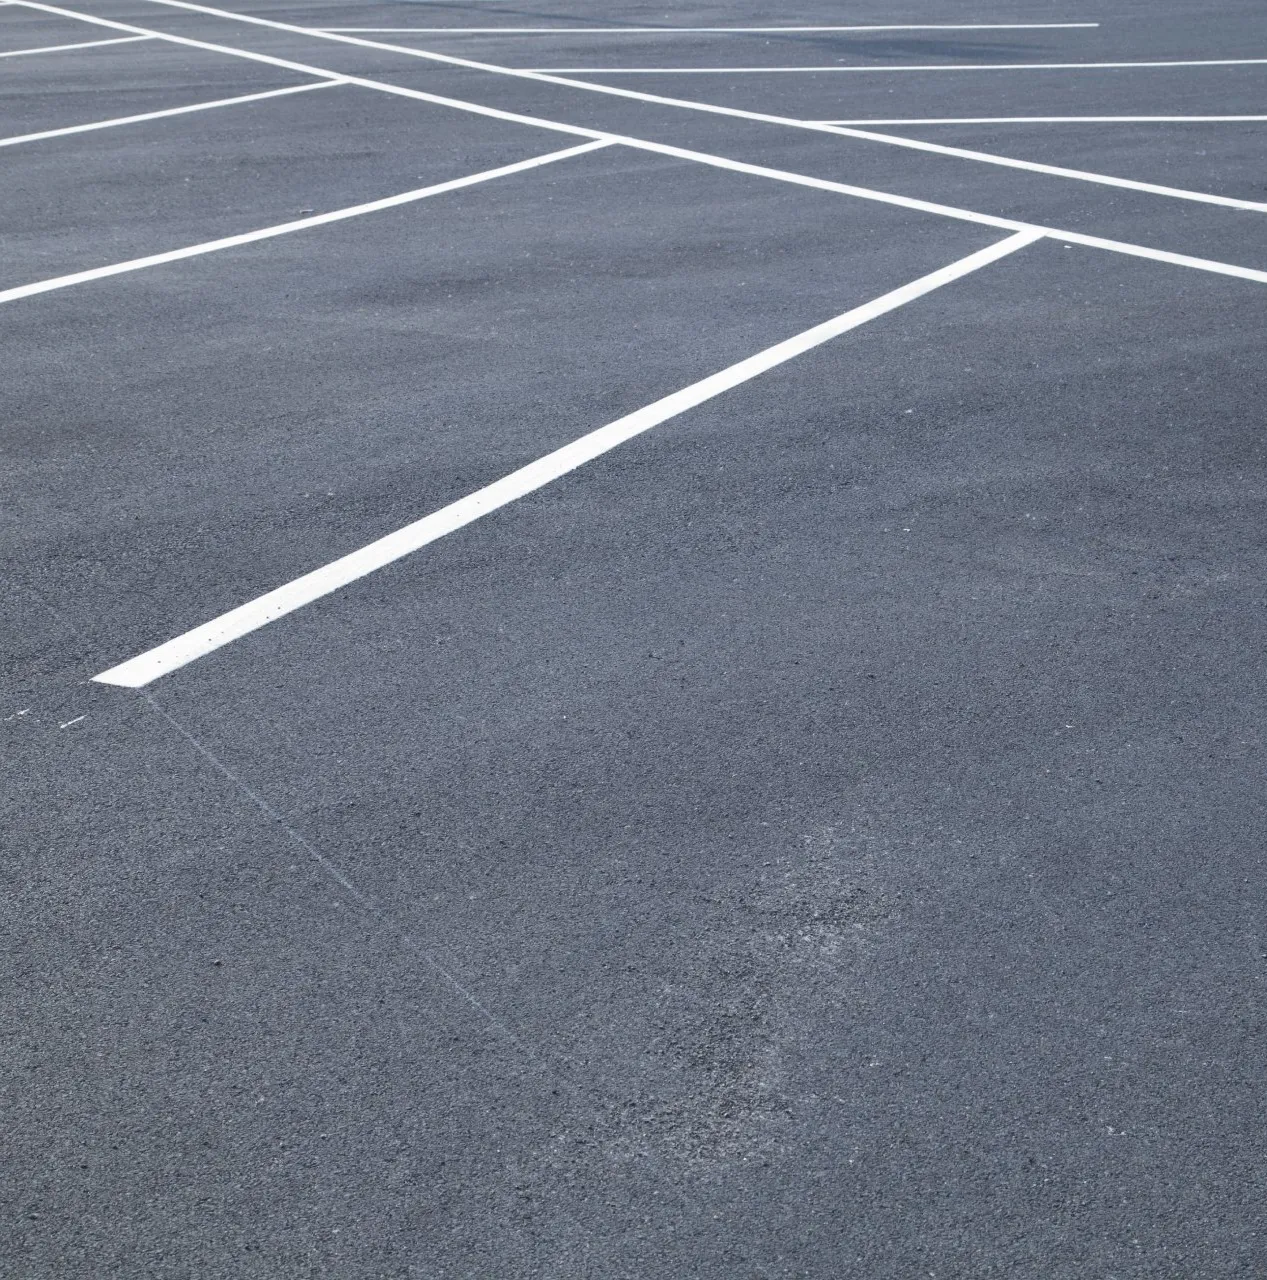 Parking lot in Miami freshly resurfaced with line striping just done